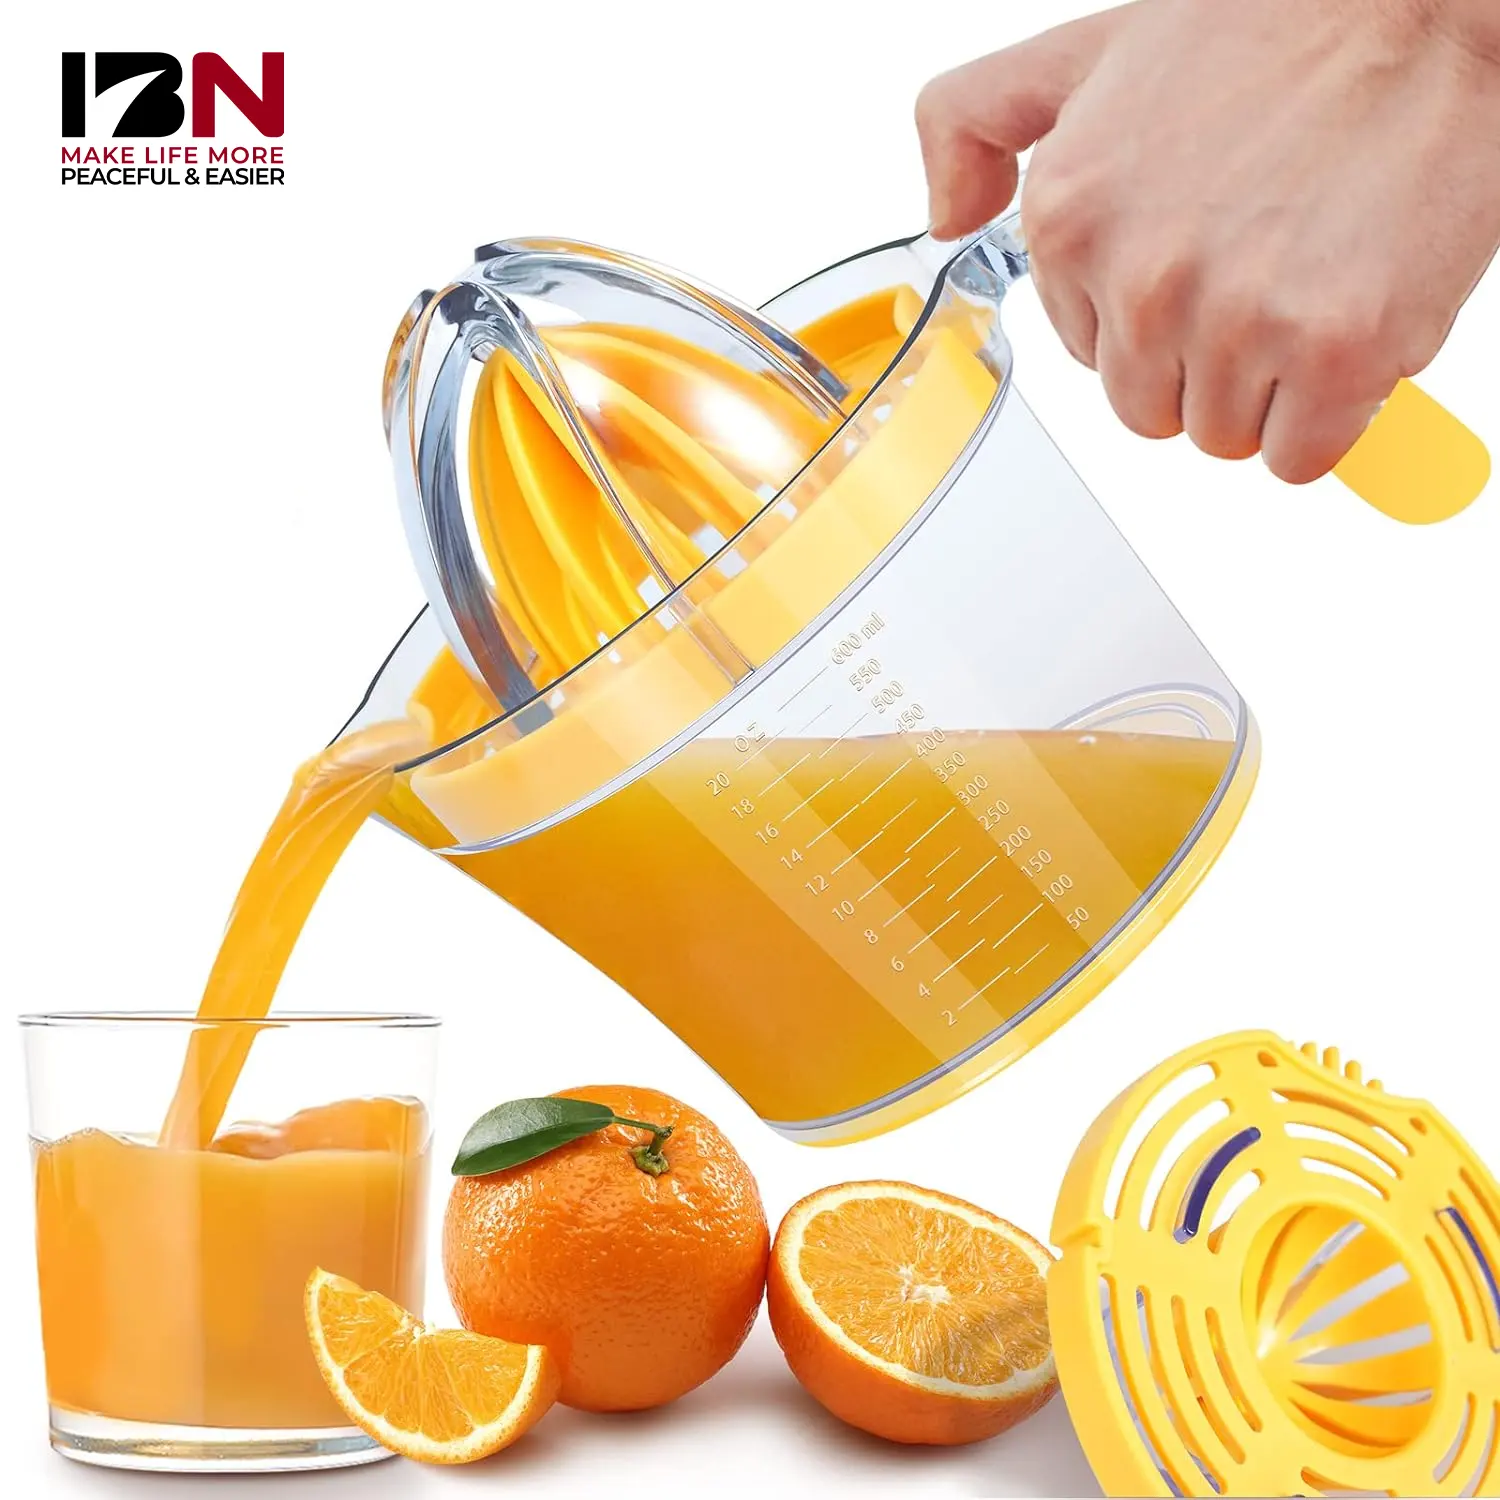 Lemon Lime Squeezer with Comfortable Grip Handle High Yield Juice Extractor 21-Ounce Capacity Orange Manual Juicer